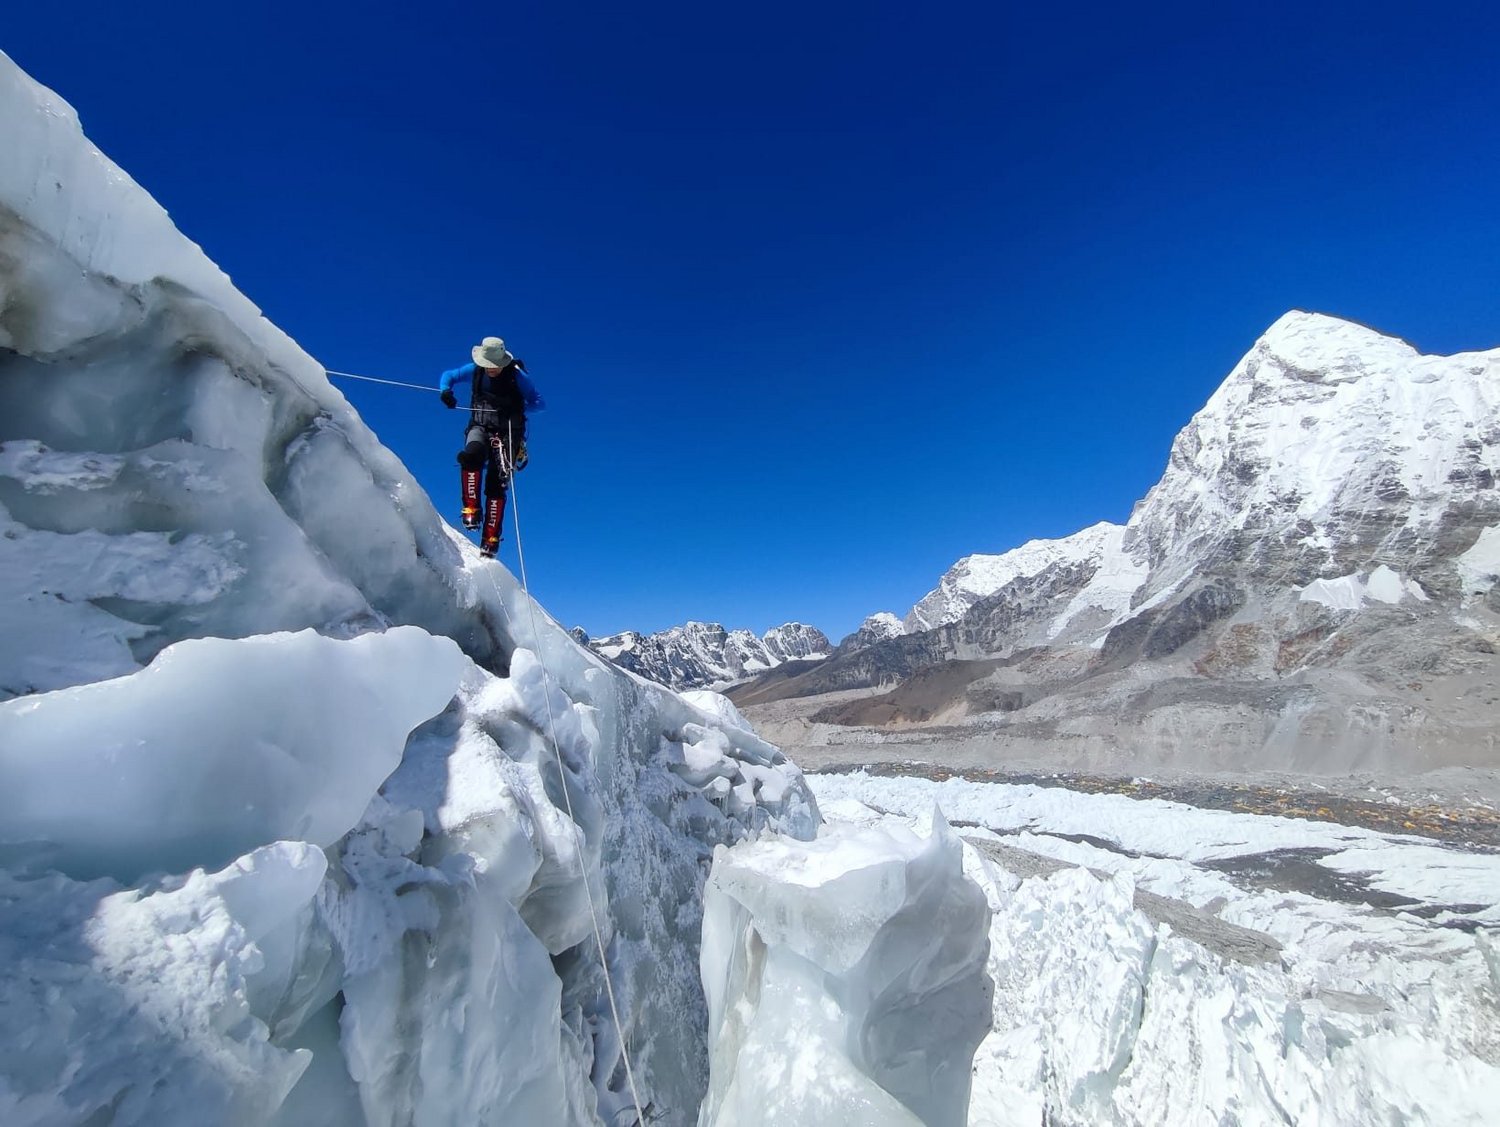 Former Saint Arthur Prestidge summited Mount Everest for a second time in May, flying a Northampton flag at the top.